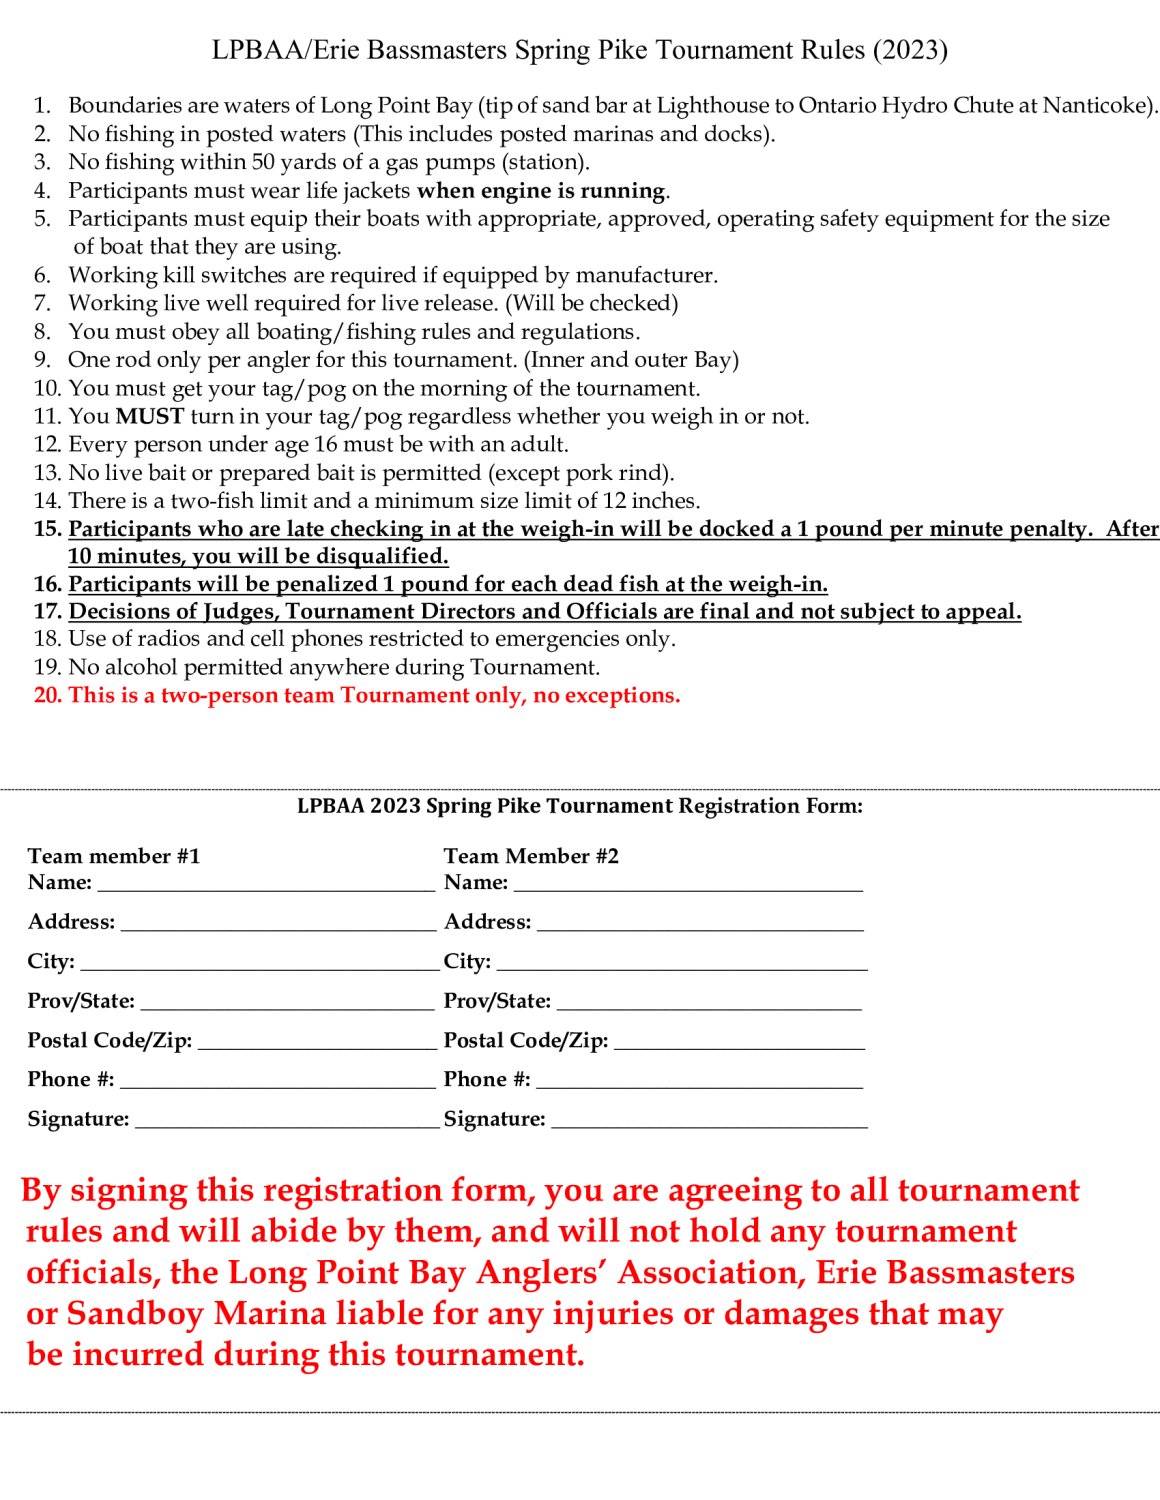 2023 Pike Tournament Rules and Registration.jpg